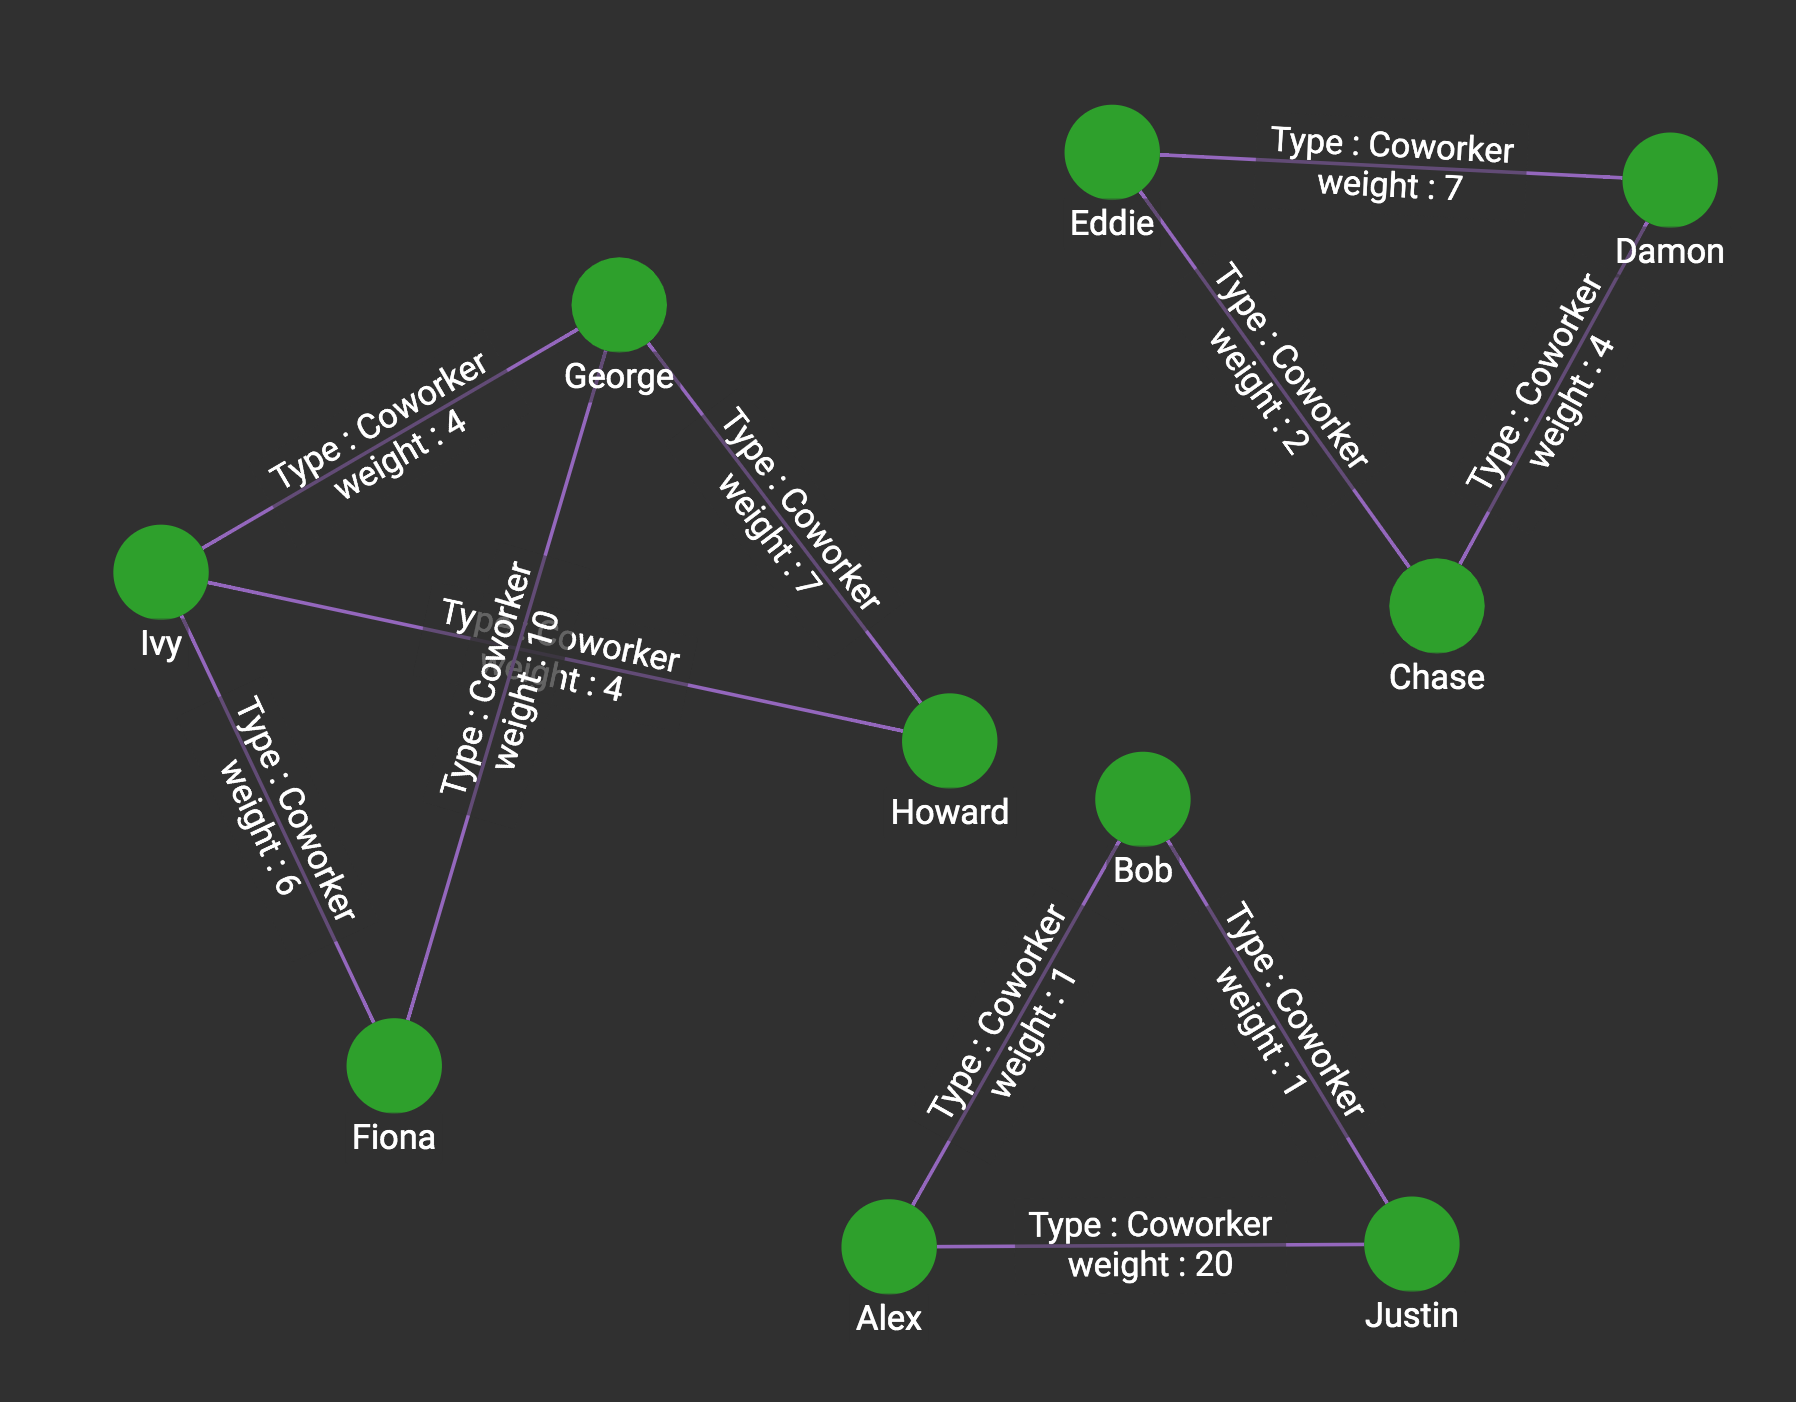 Visualized results of example graph social10 graph with Coworker edges